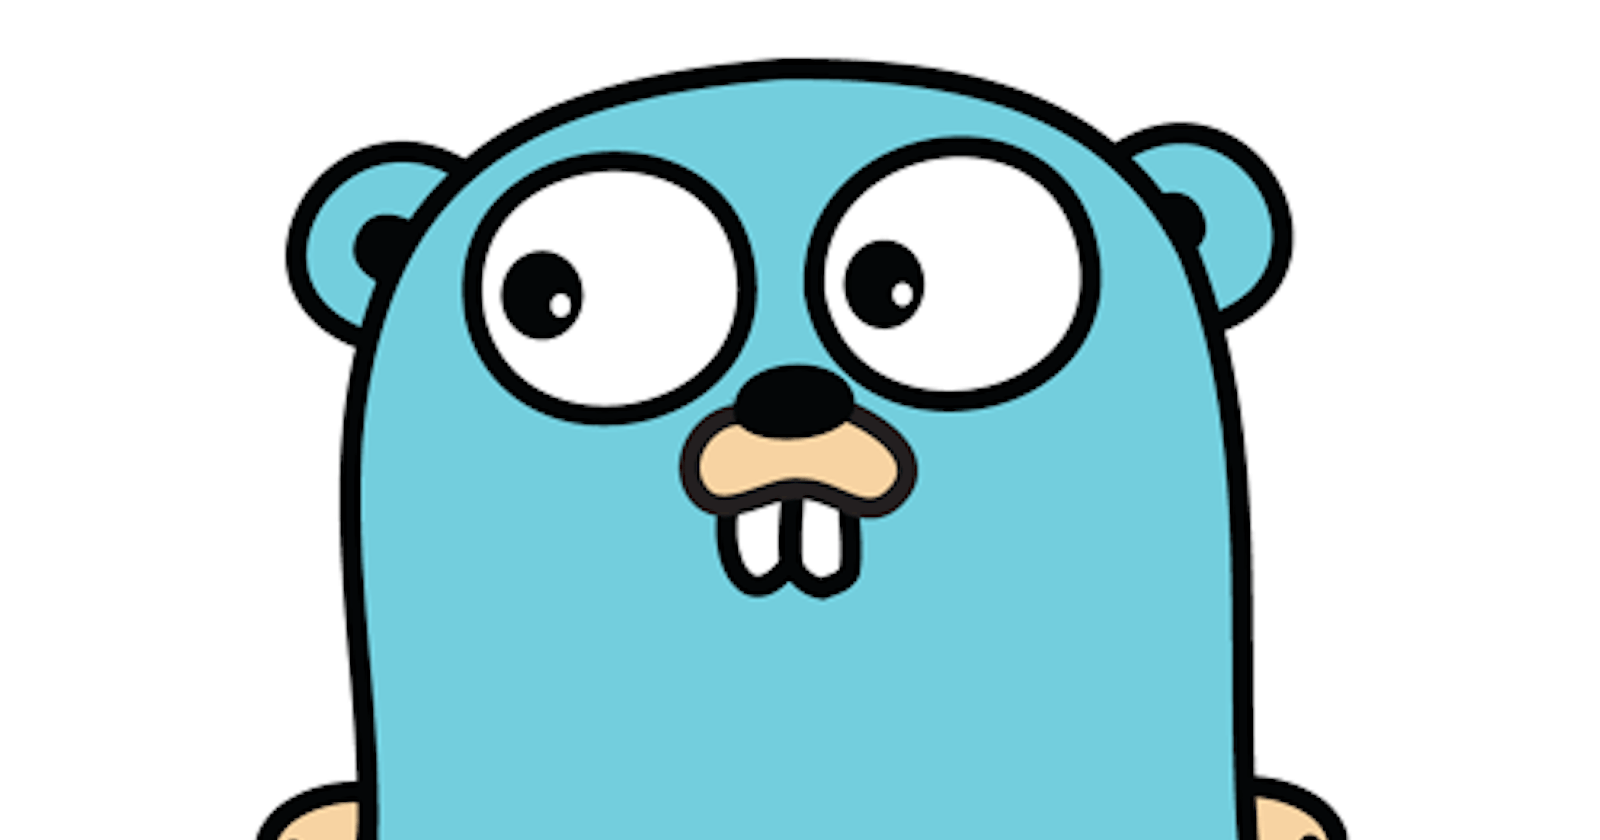 Functional Options in GoLang